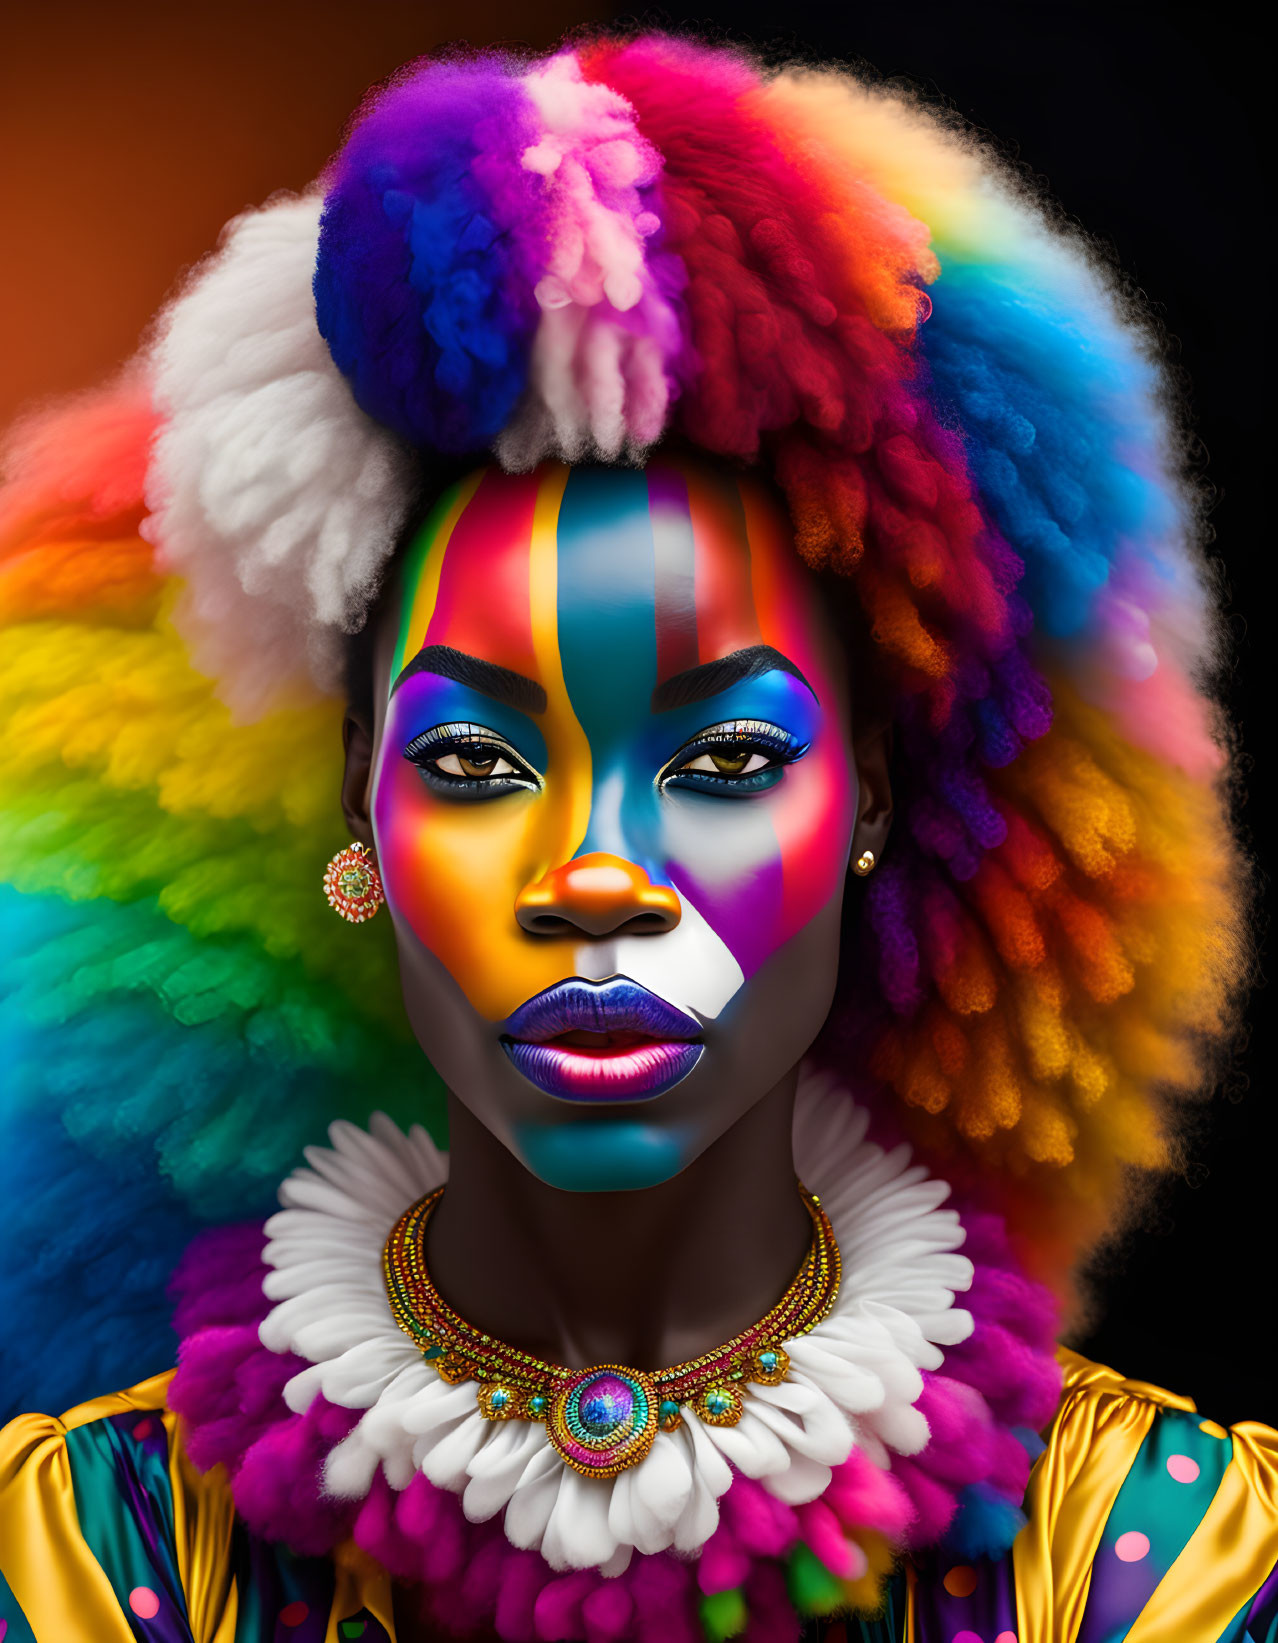 Colorful digital portrait of a woman with face paint and multicolored afro.